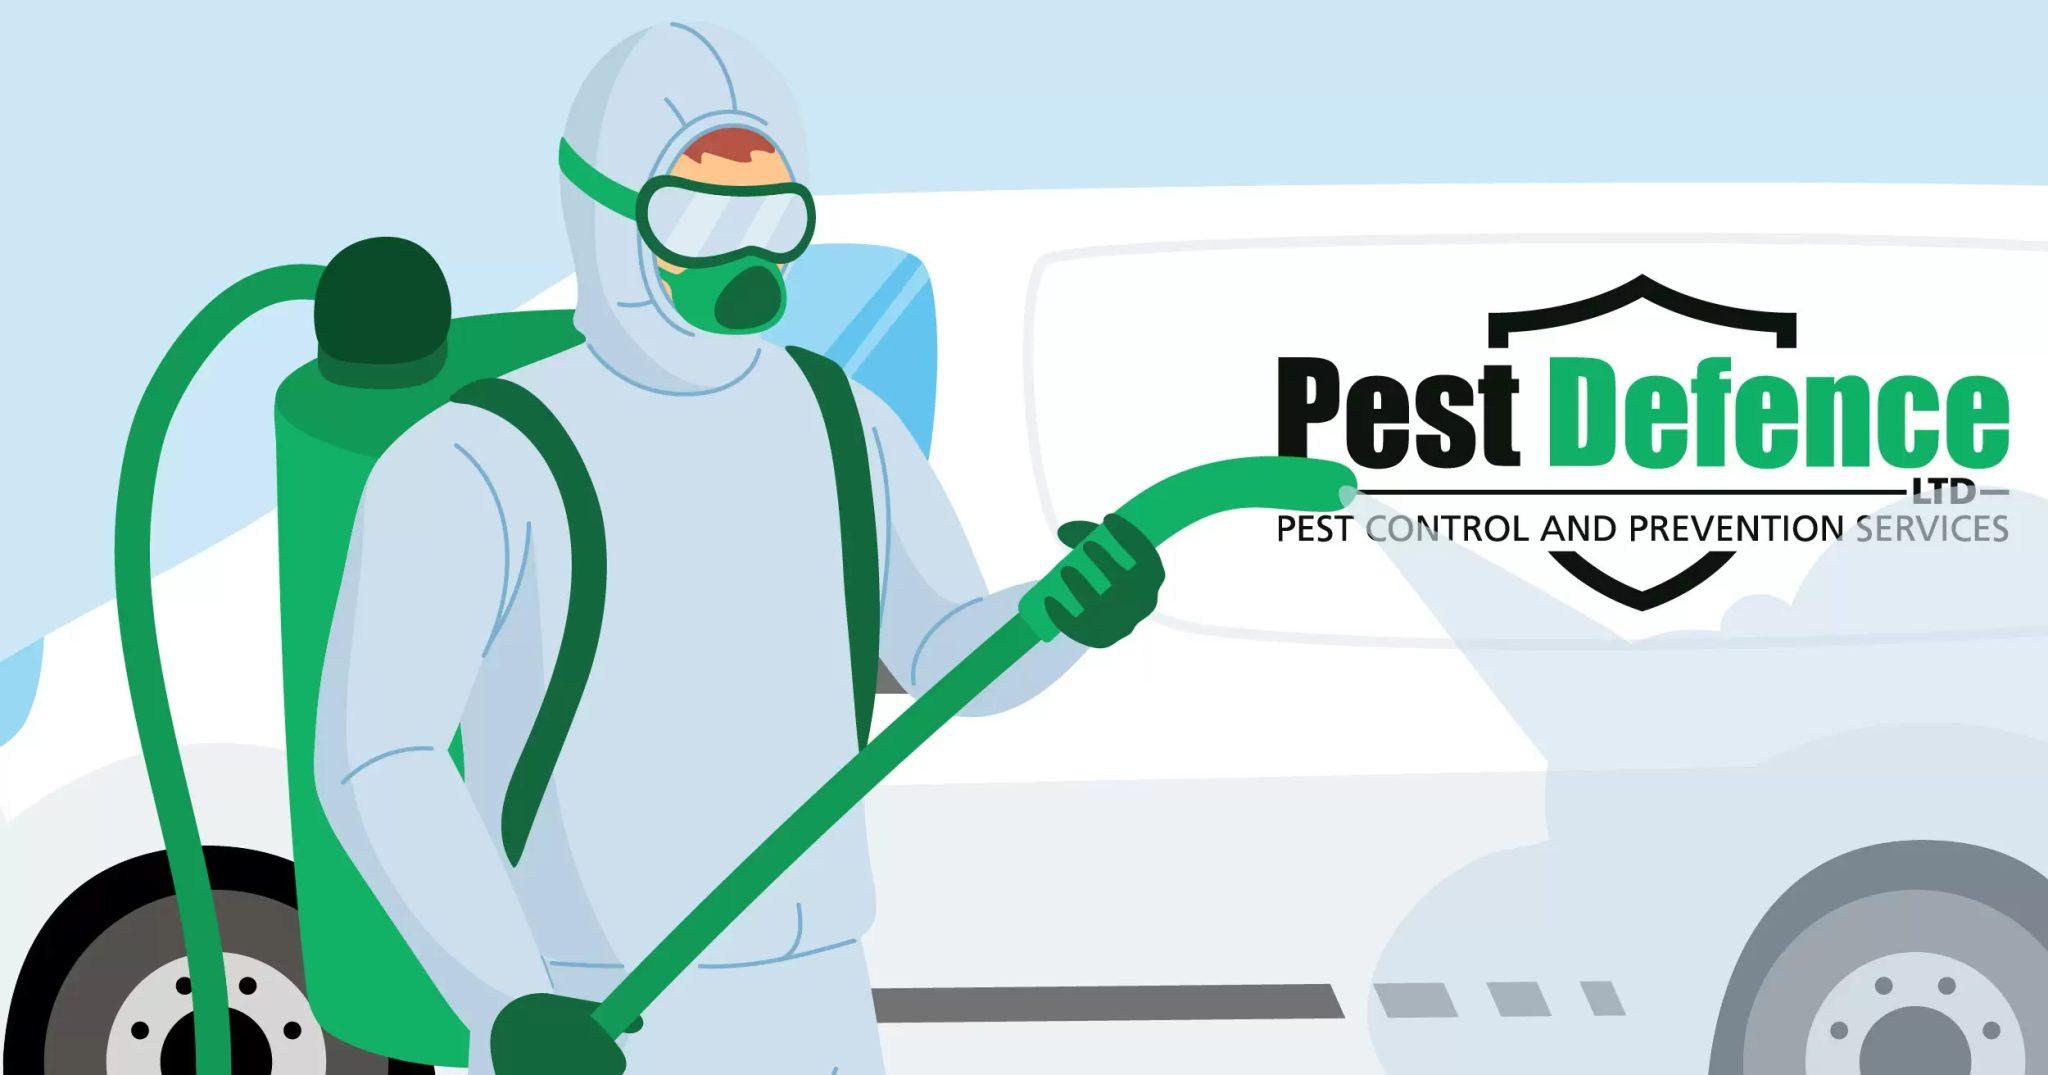 Graphic representing Pest Defence at work